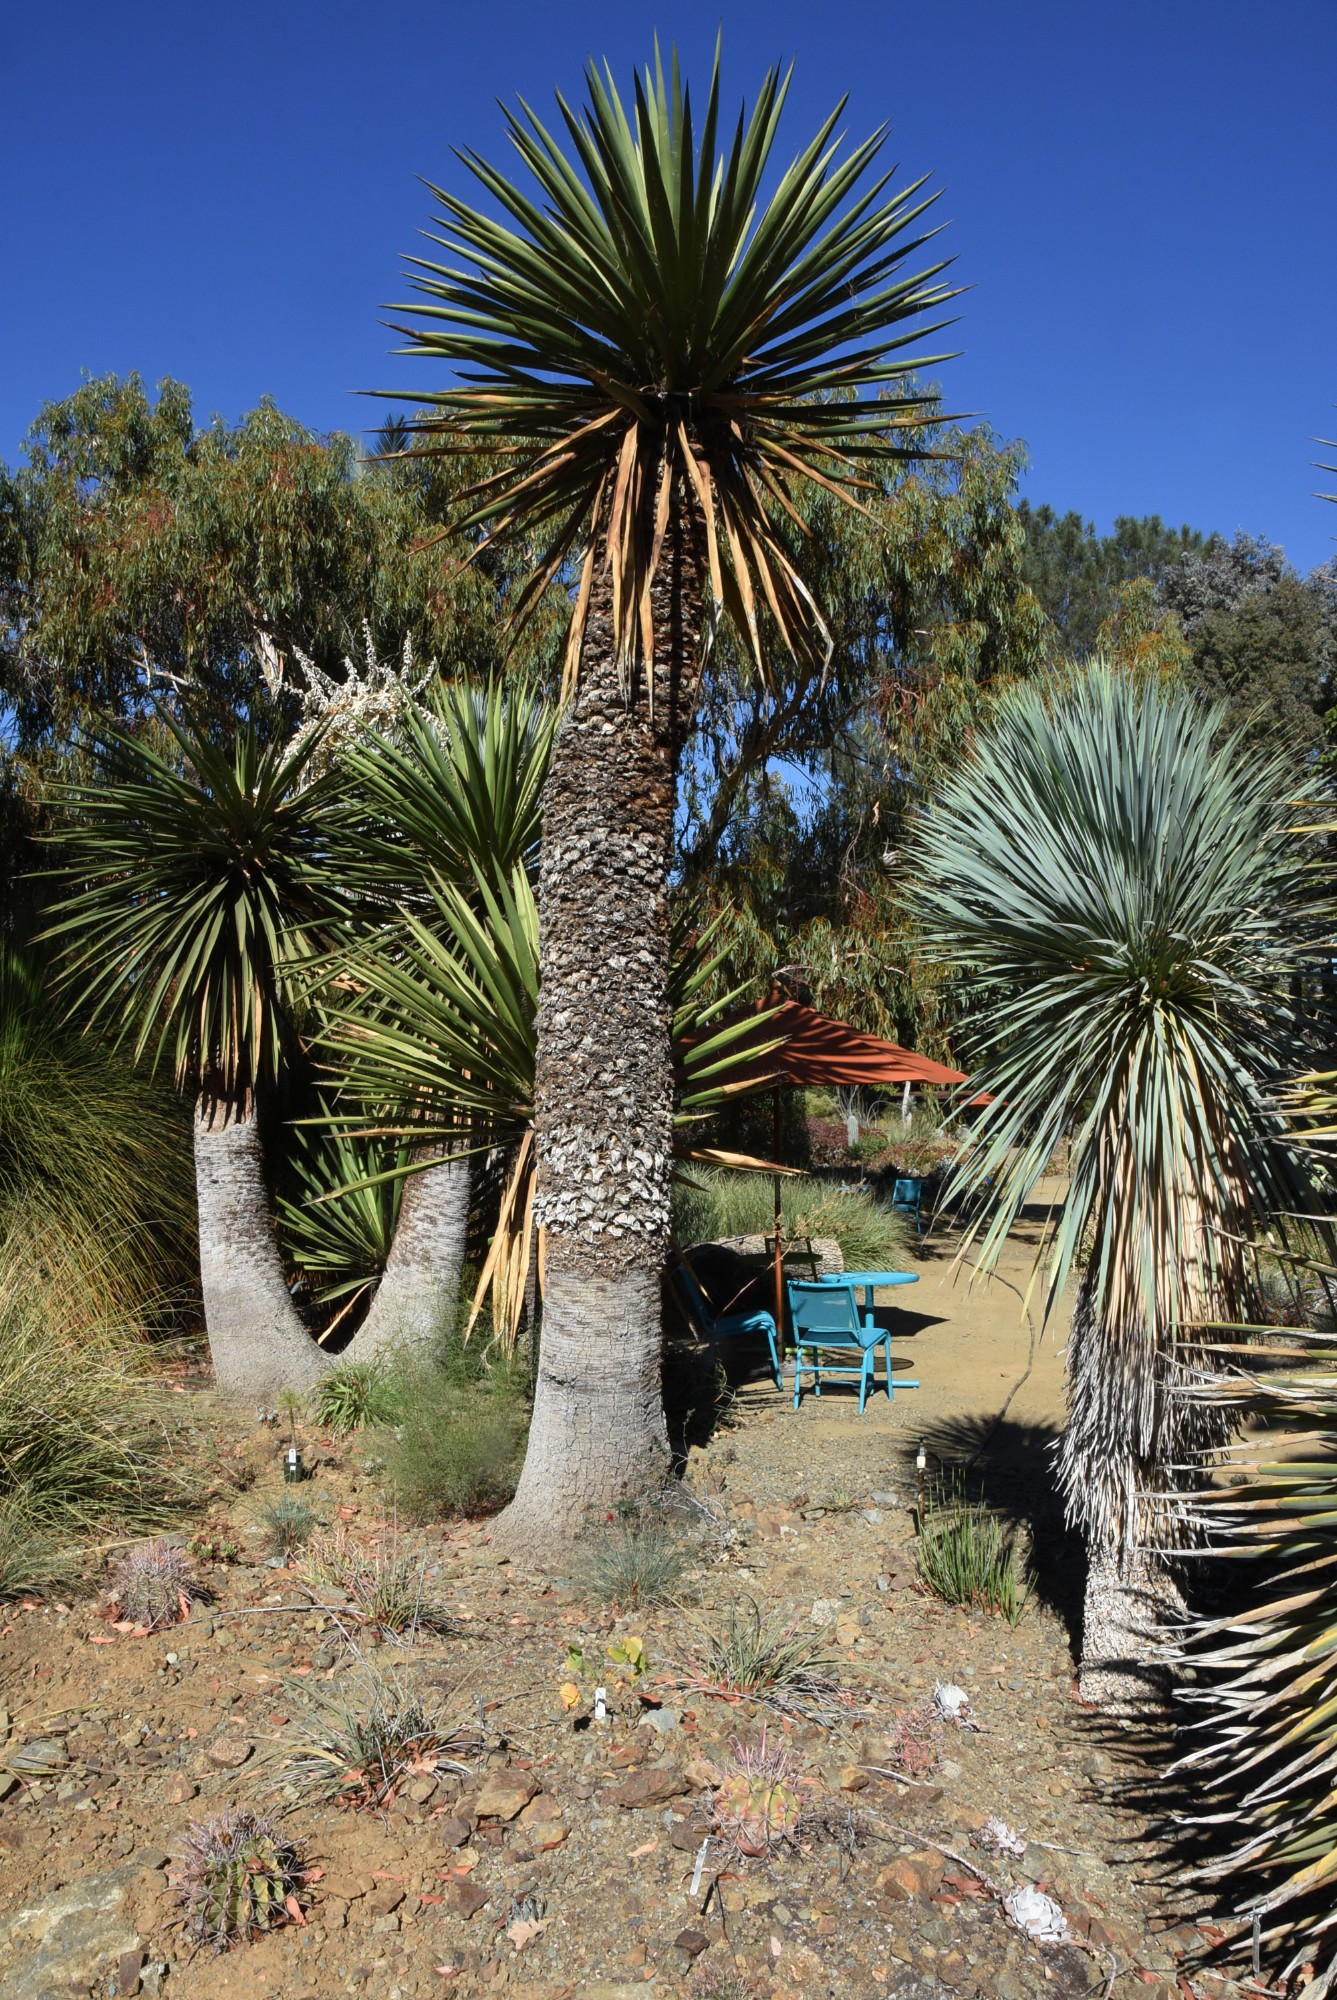 The Ruth Bancroft Garden Has Numerous Gardens With Vignettes